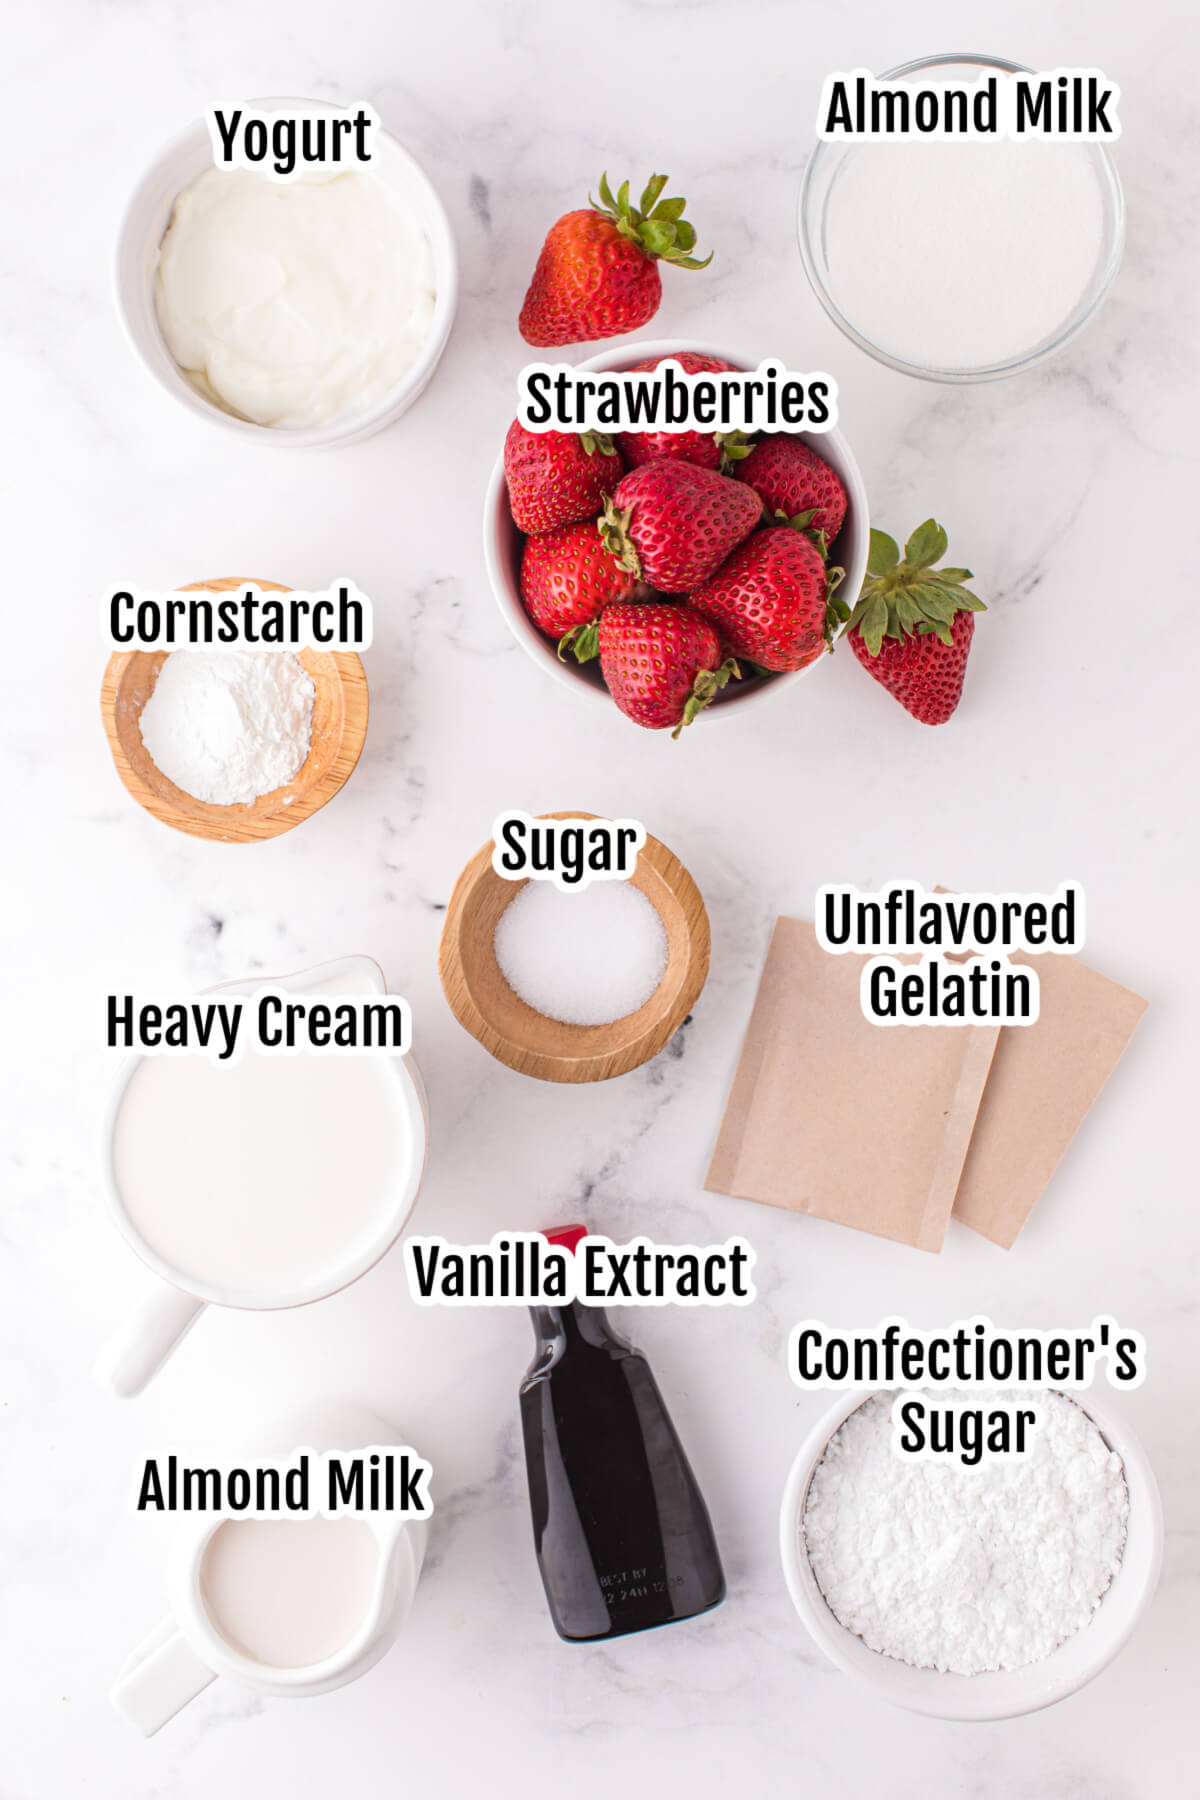 Image with the ingredients for Panna Cotta with Strawberry Sauce.